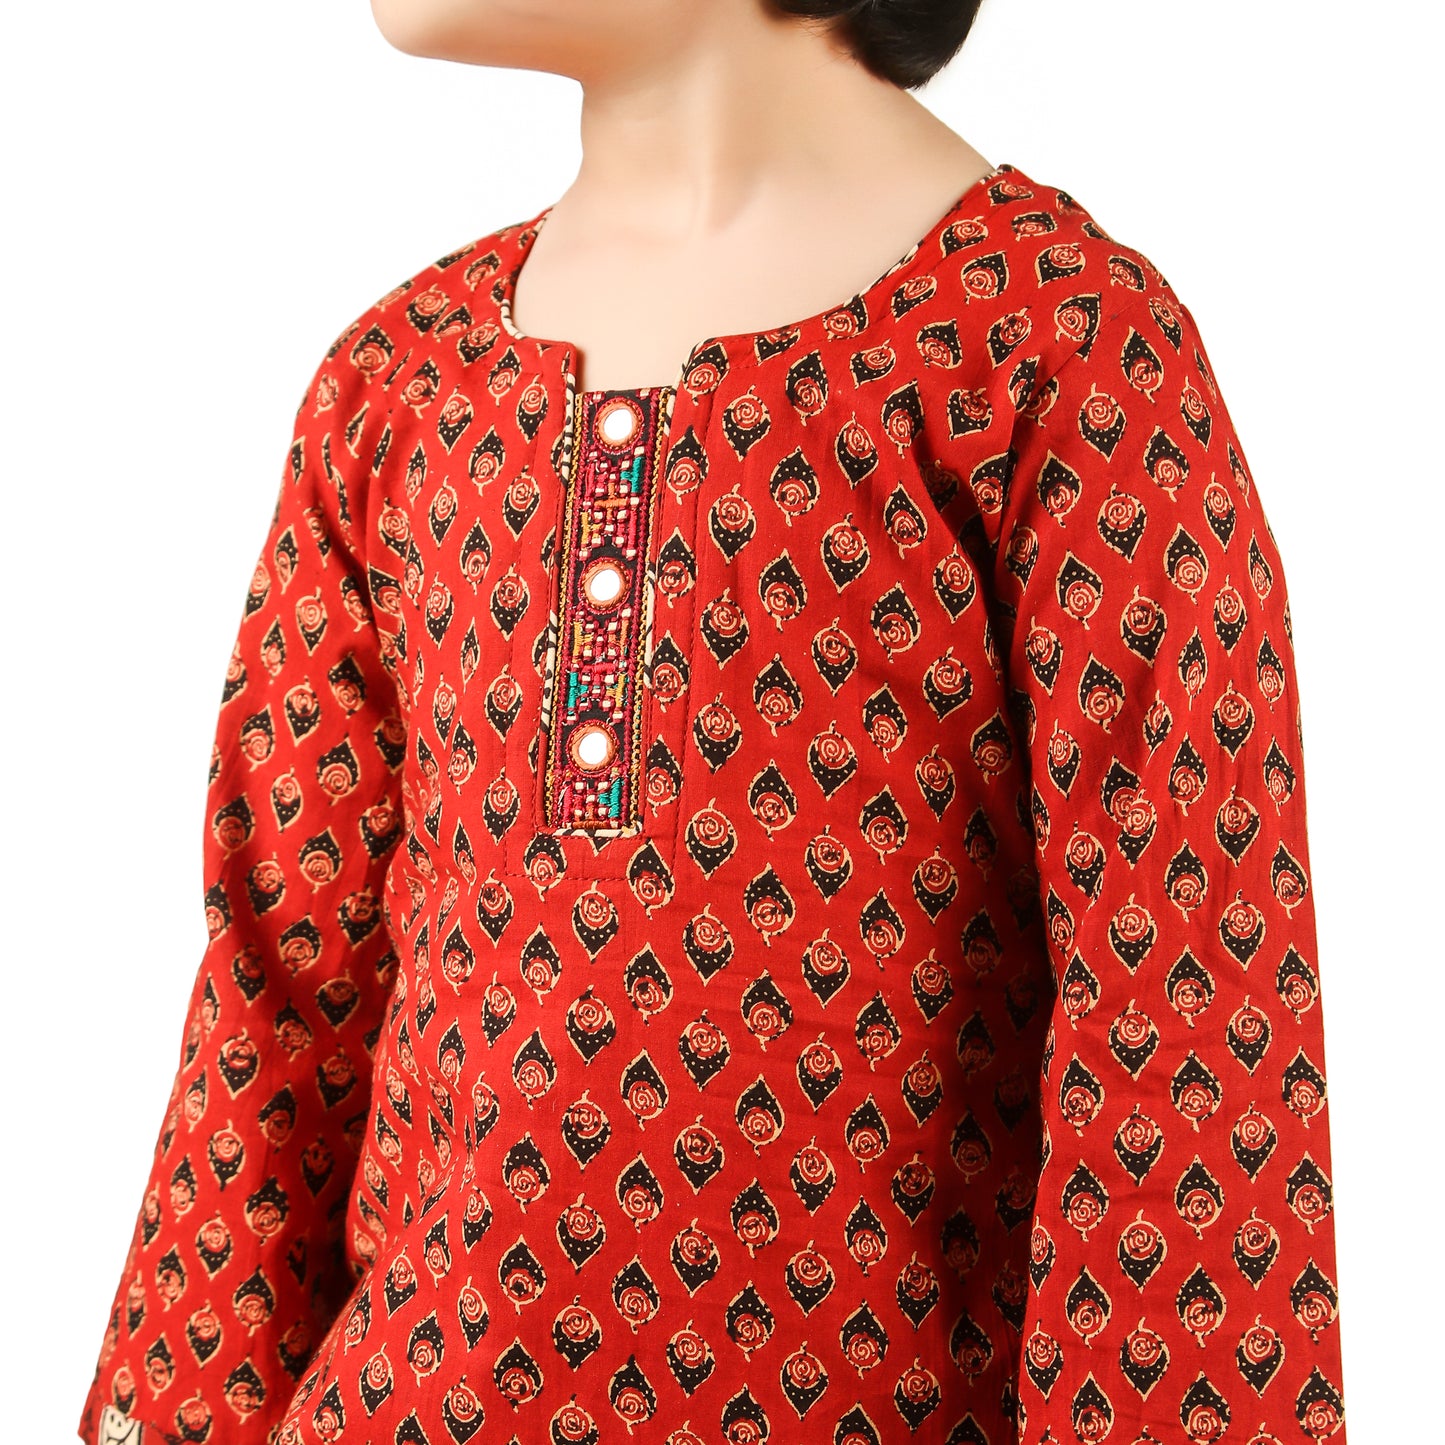 Red Salwar Suit for Girls- Ages 0-16Y - Block Print